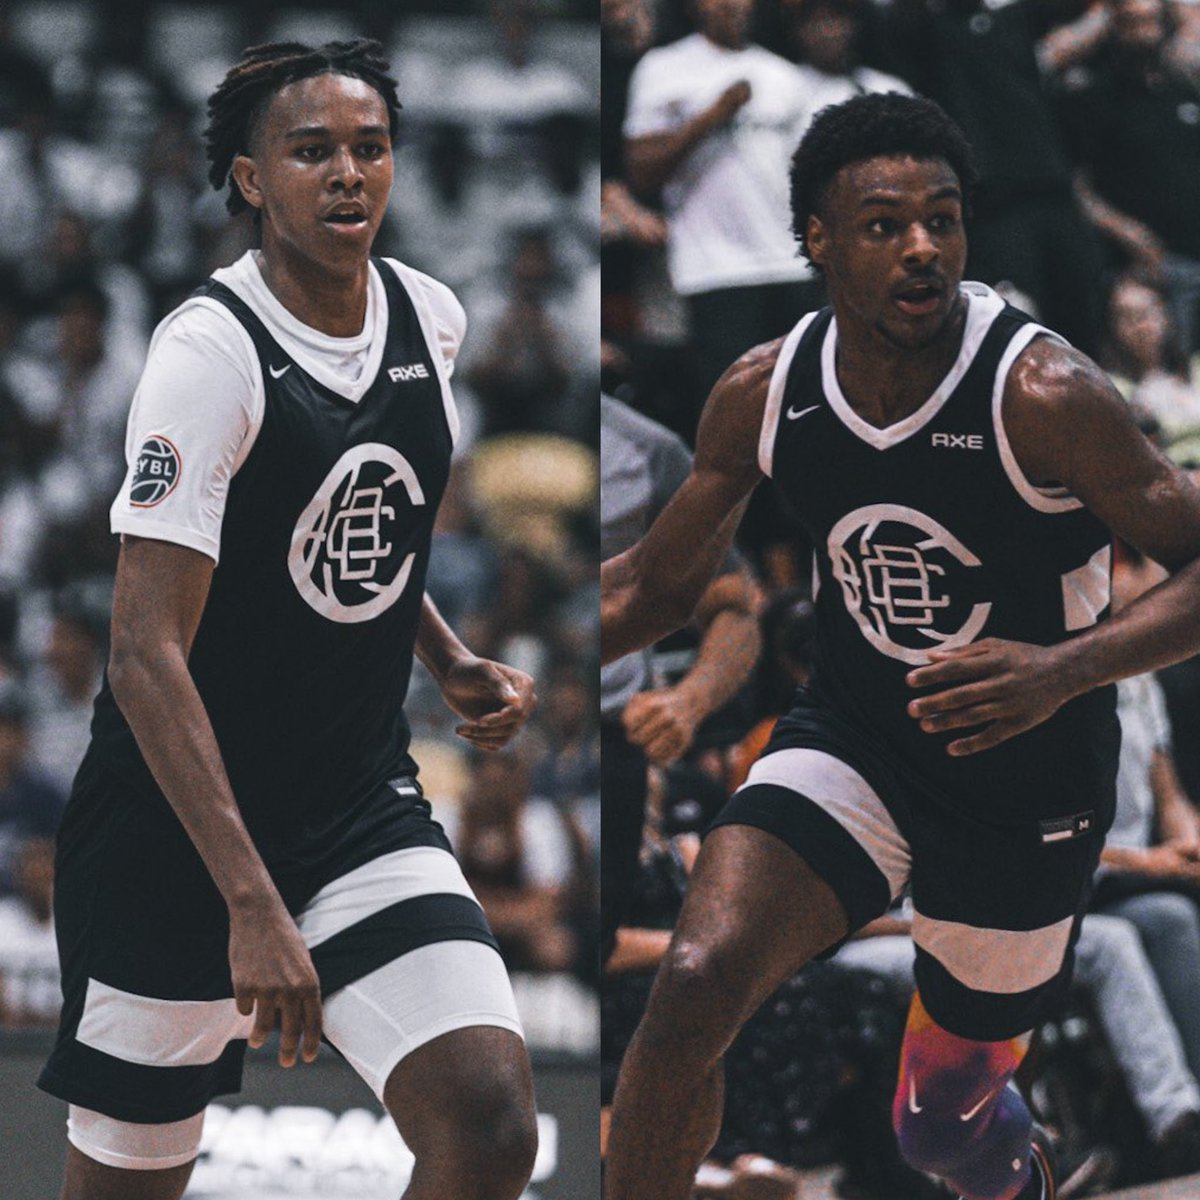 Ashton Hardaway and Bronny James are leading the way for Sierra Canyon right now over Bishop Gorman. The pair have combined for 40pts on 15-20 from the floor and 7-11 from three. Excited to see what this group will look like once Isaiah Elohim returns. Gonna be fun to watch.